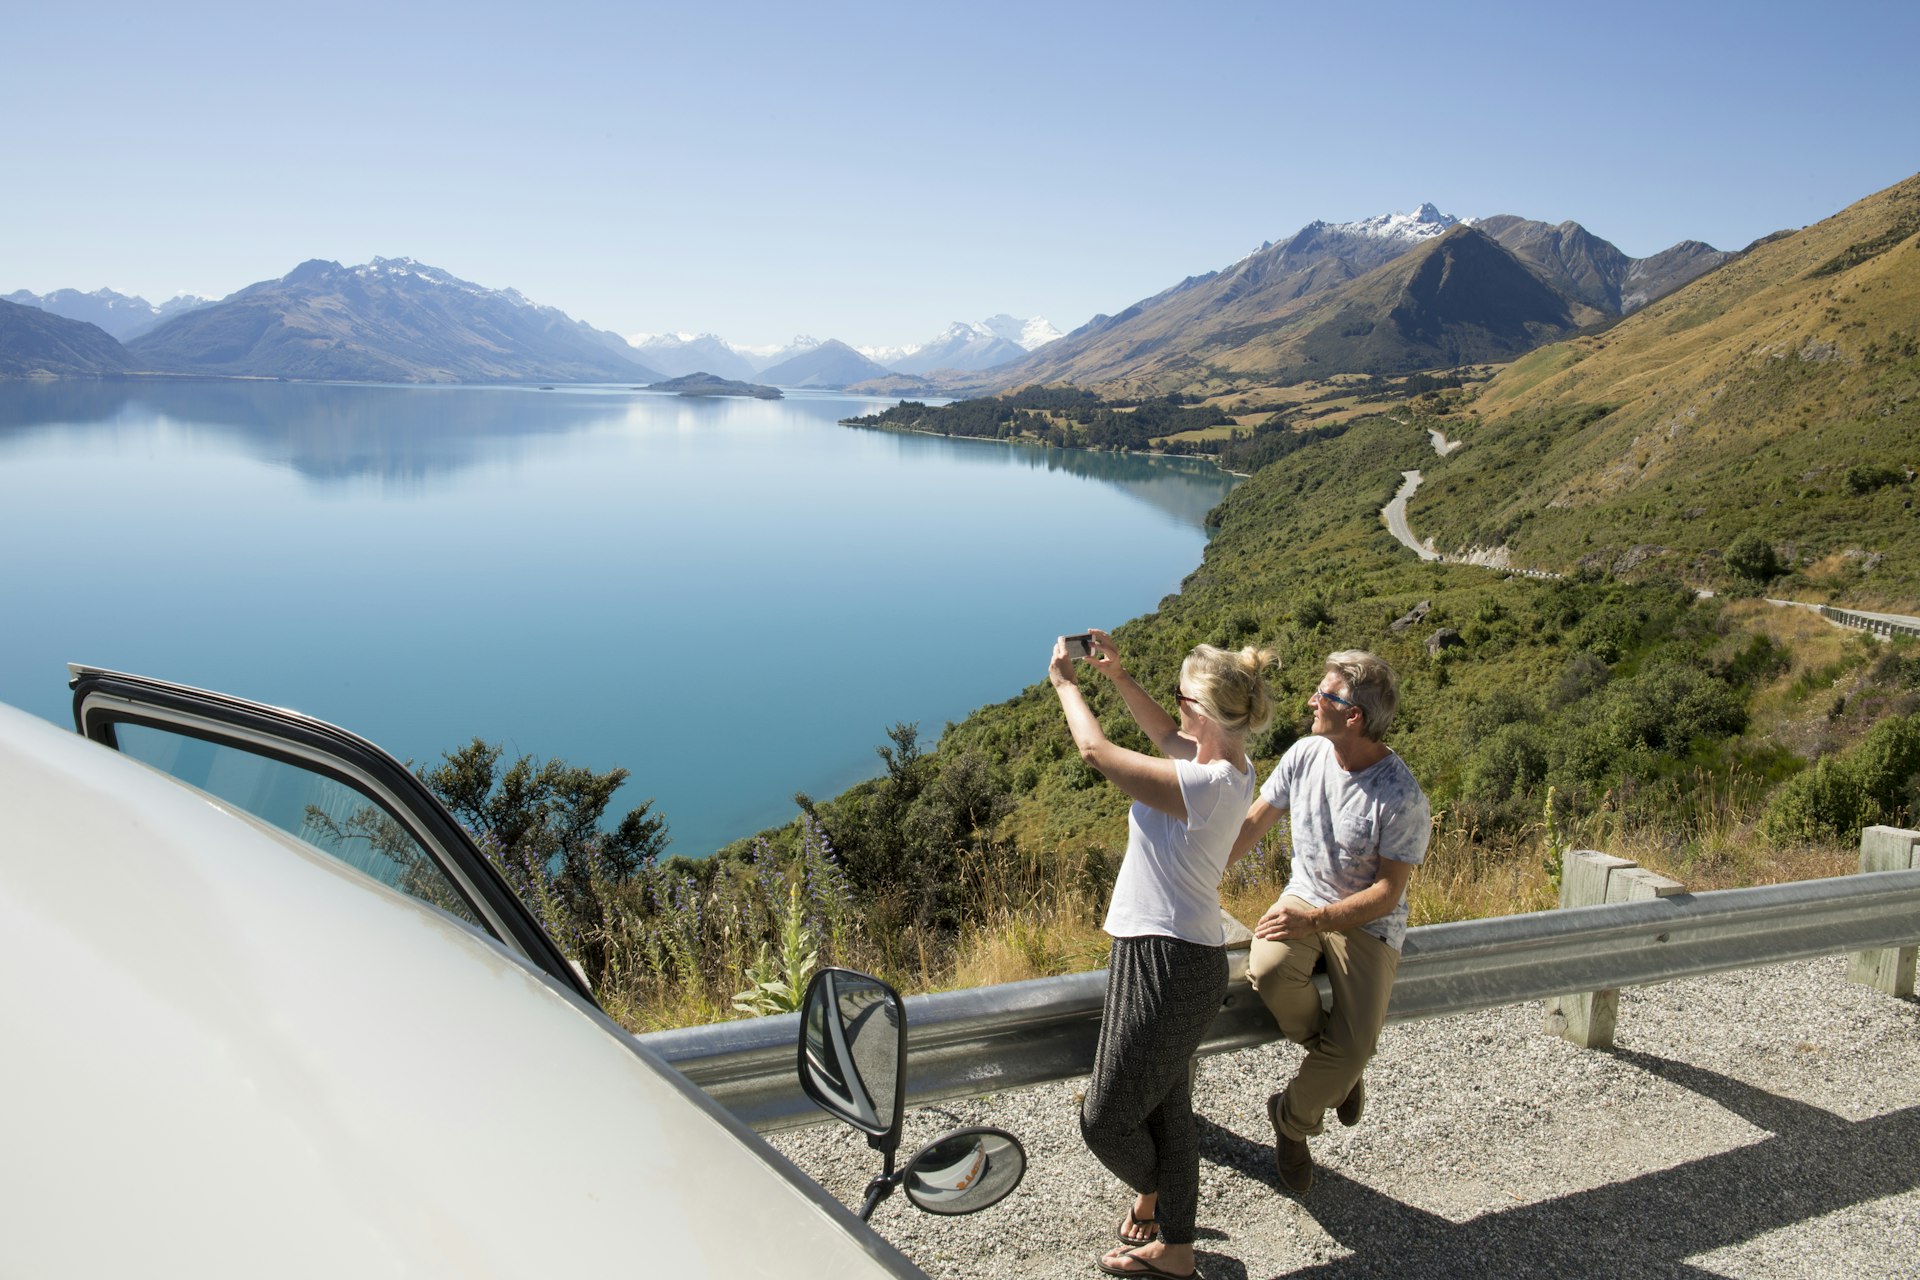 Woman takes pic beside camper van overlooking lake and mountain in Queenstown, New Zealand while man relaxes